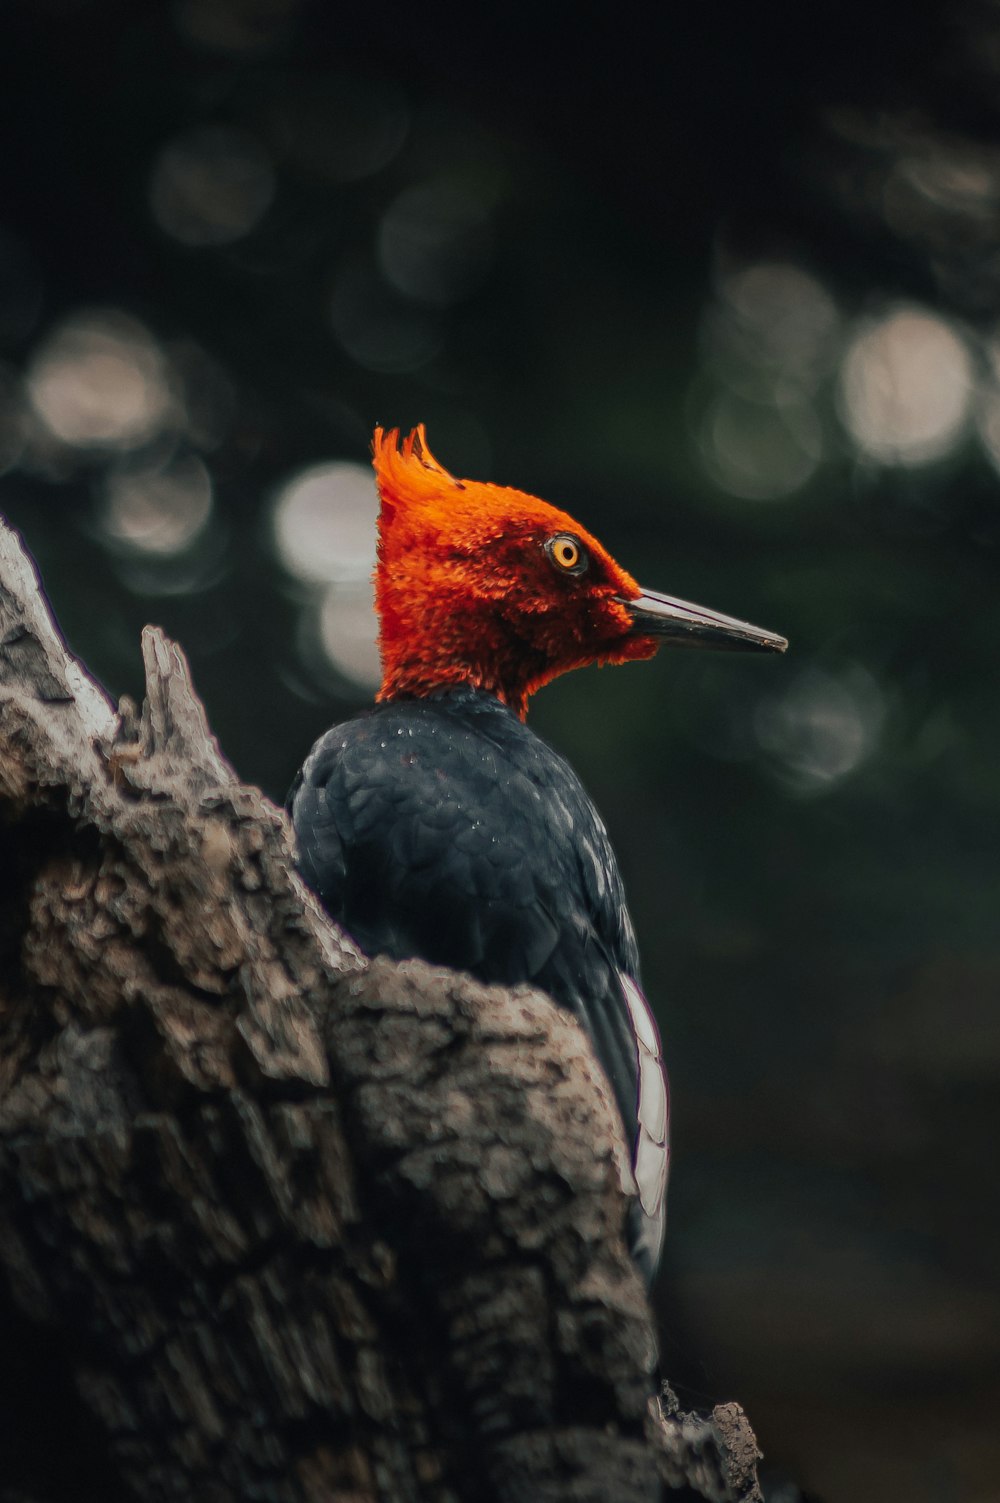 bokeh photography of black, red, and white woodpecker bird